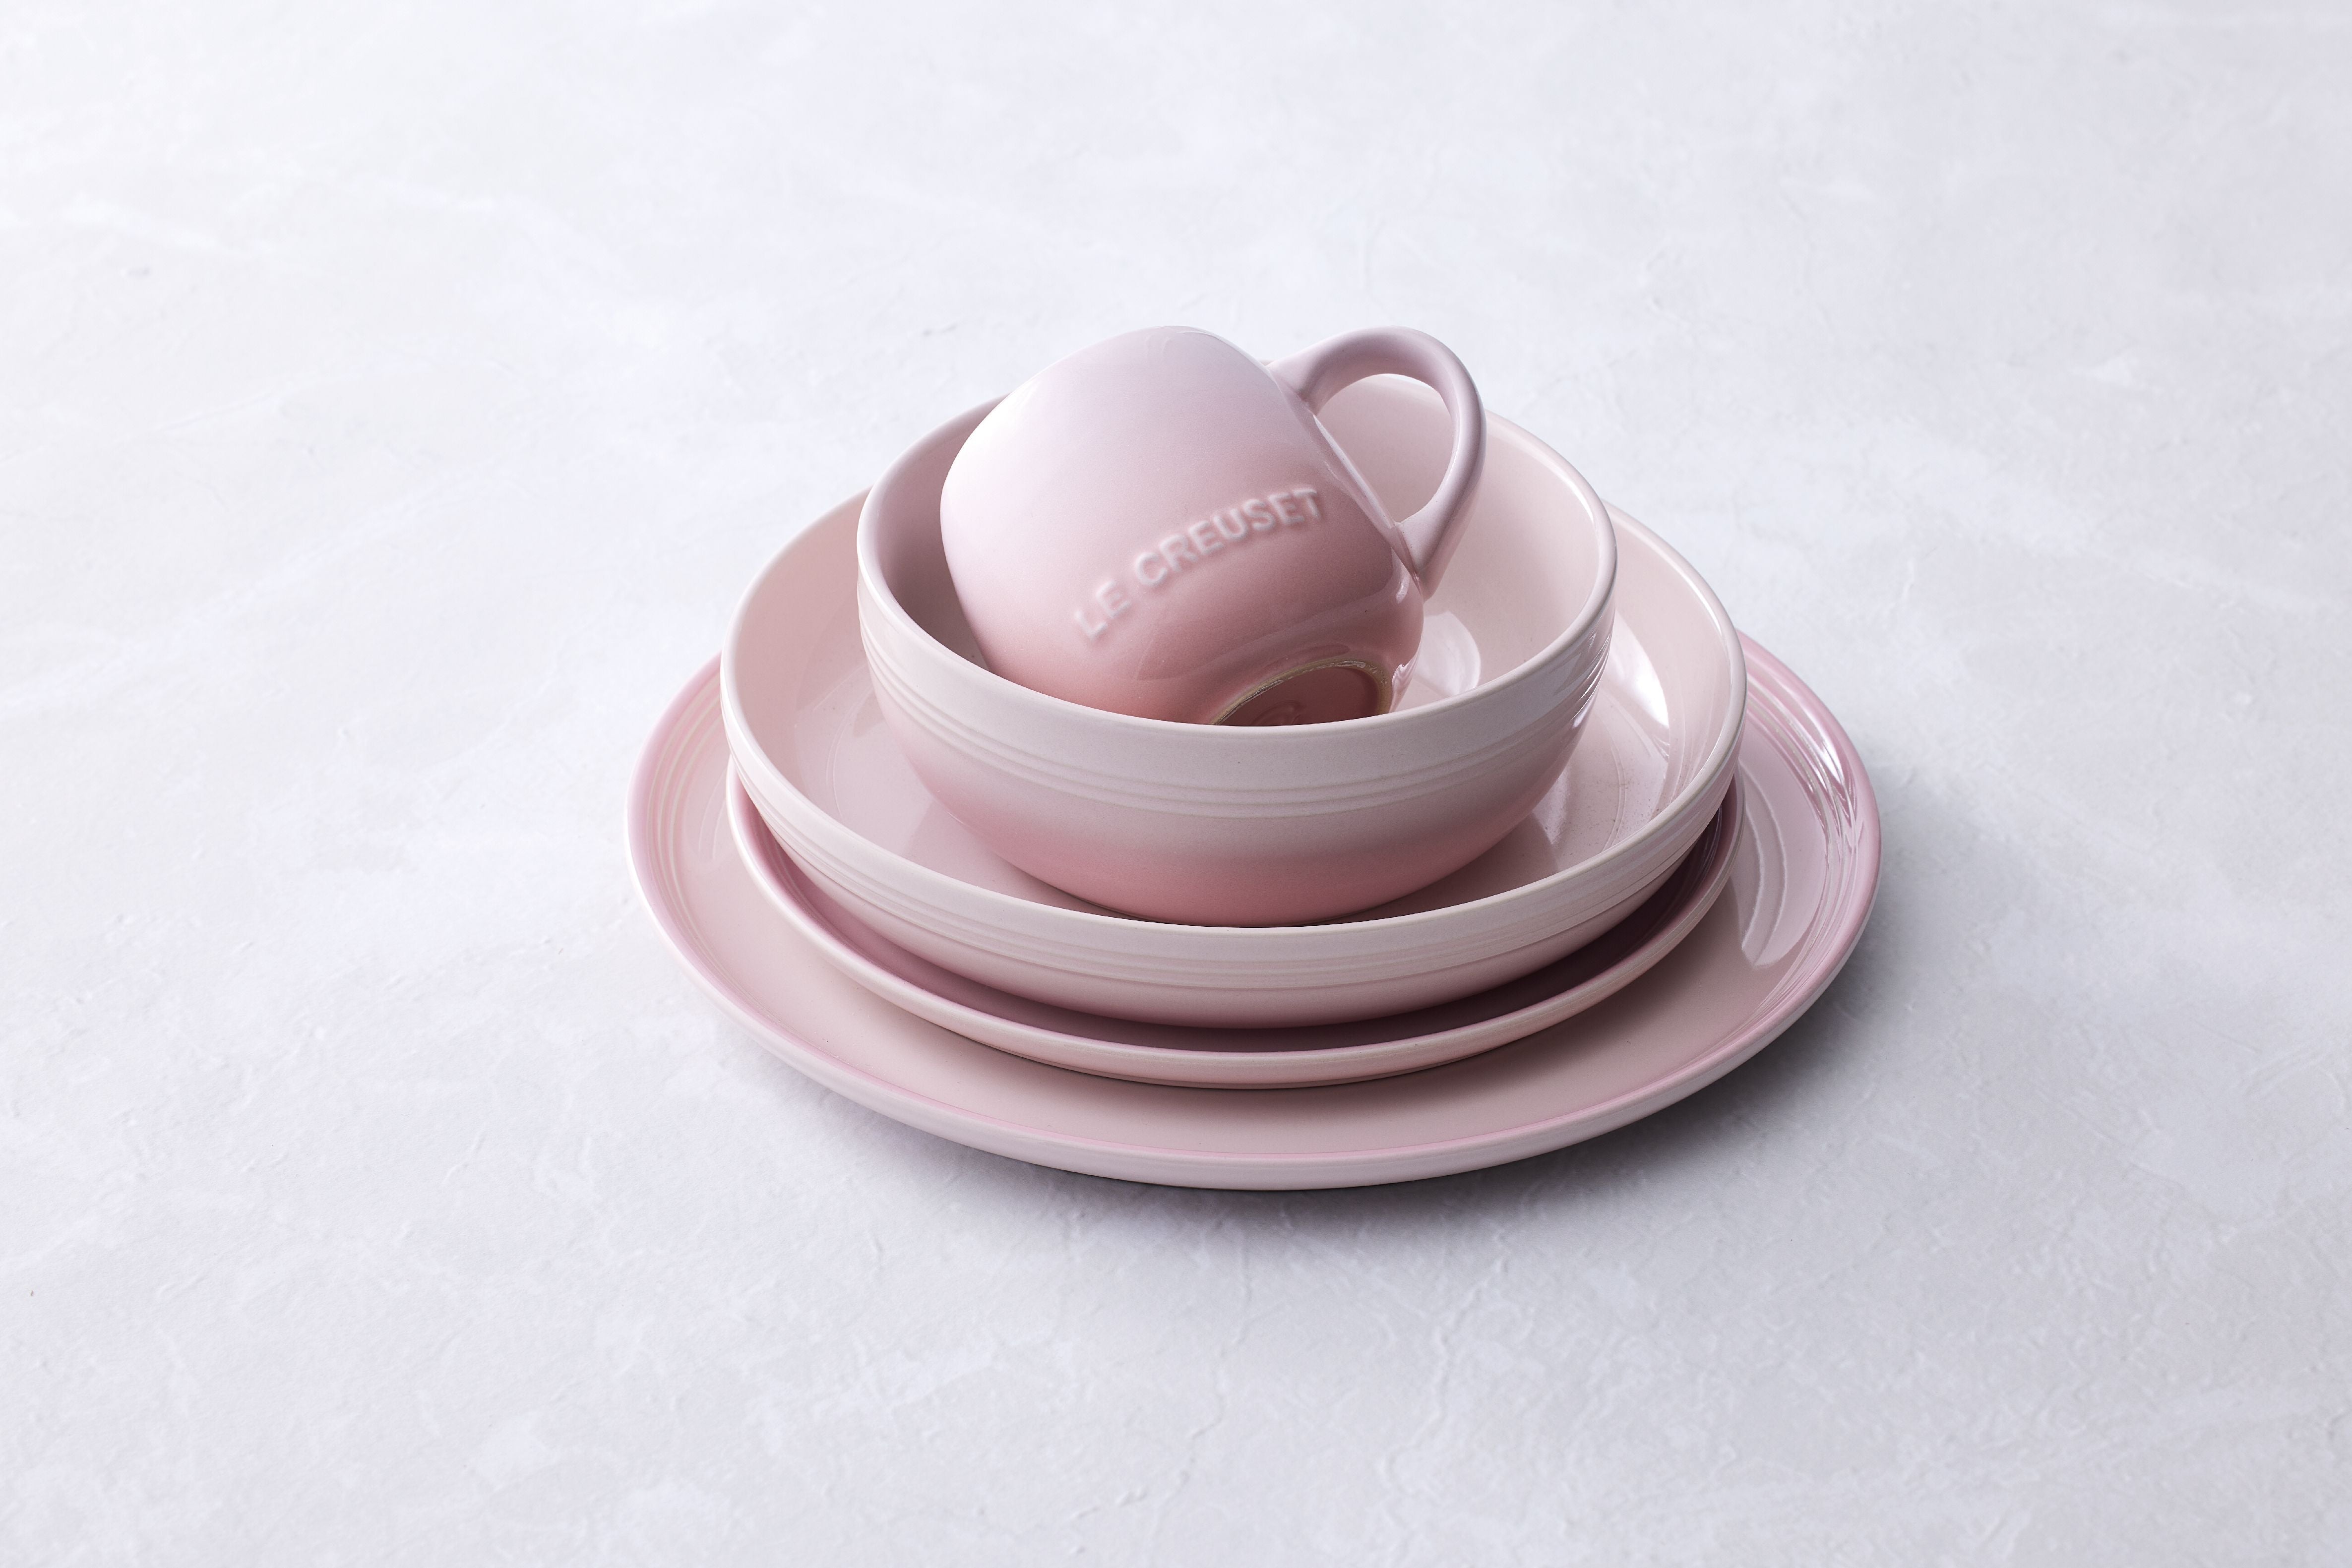 Le creuset coupe pasta skål, shell pink